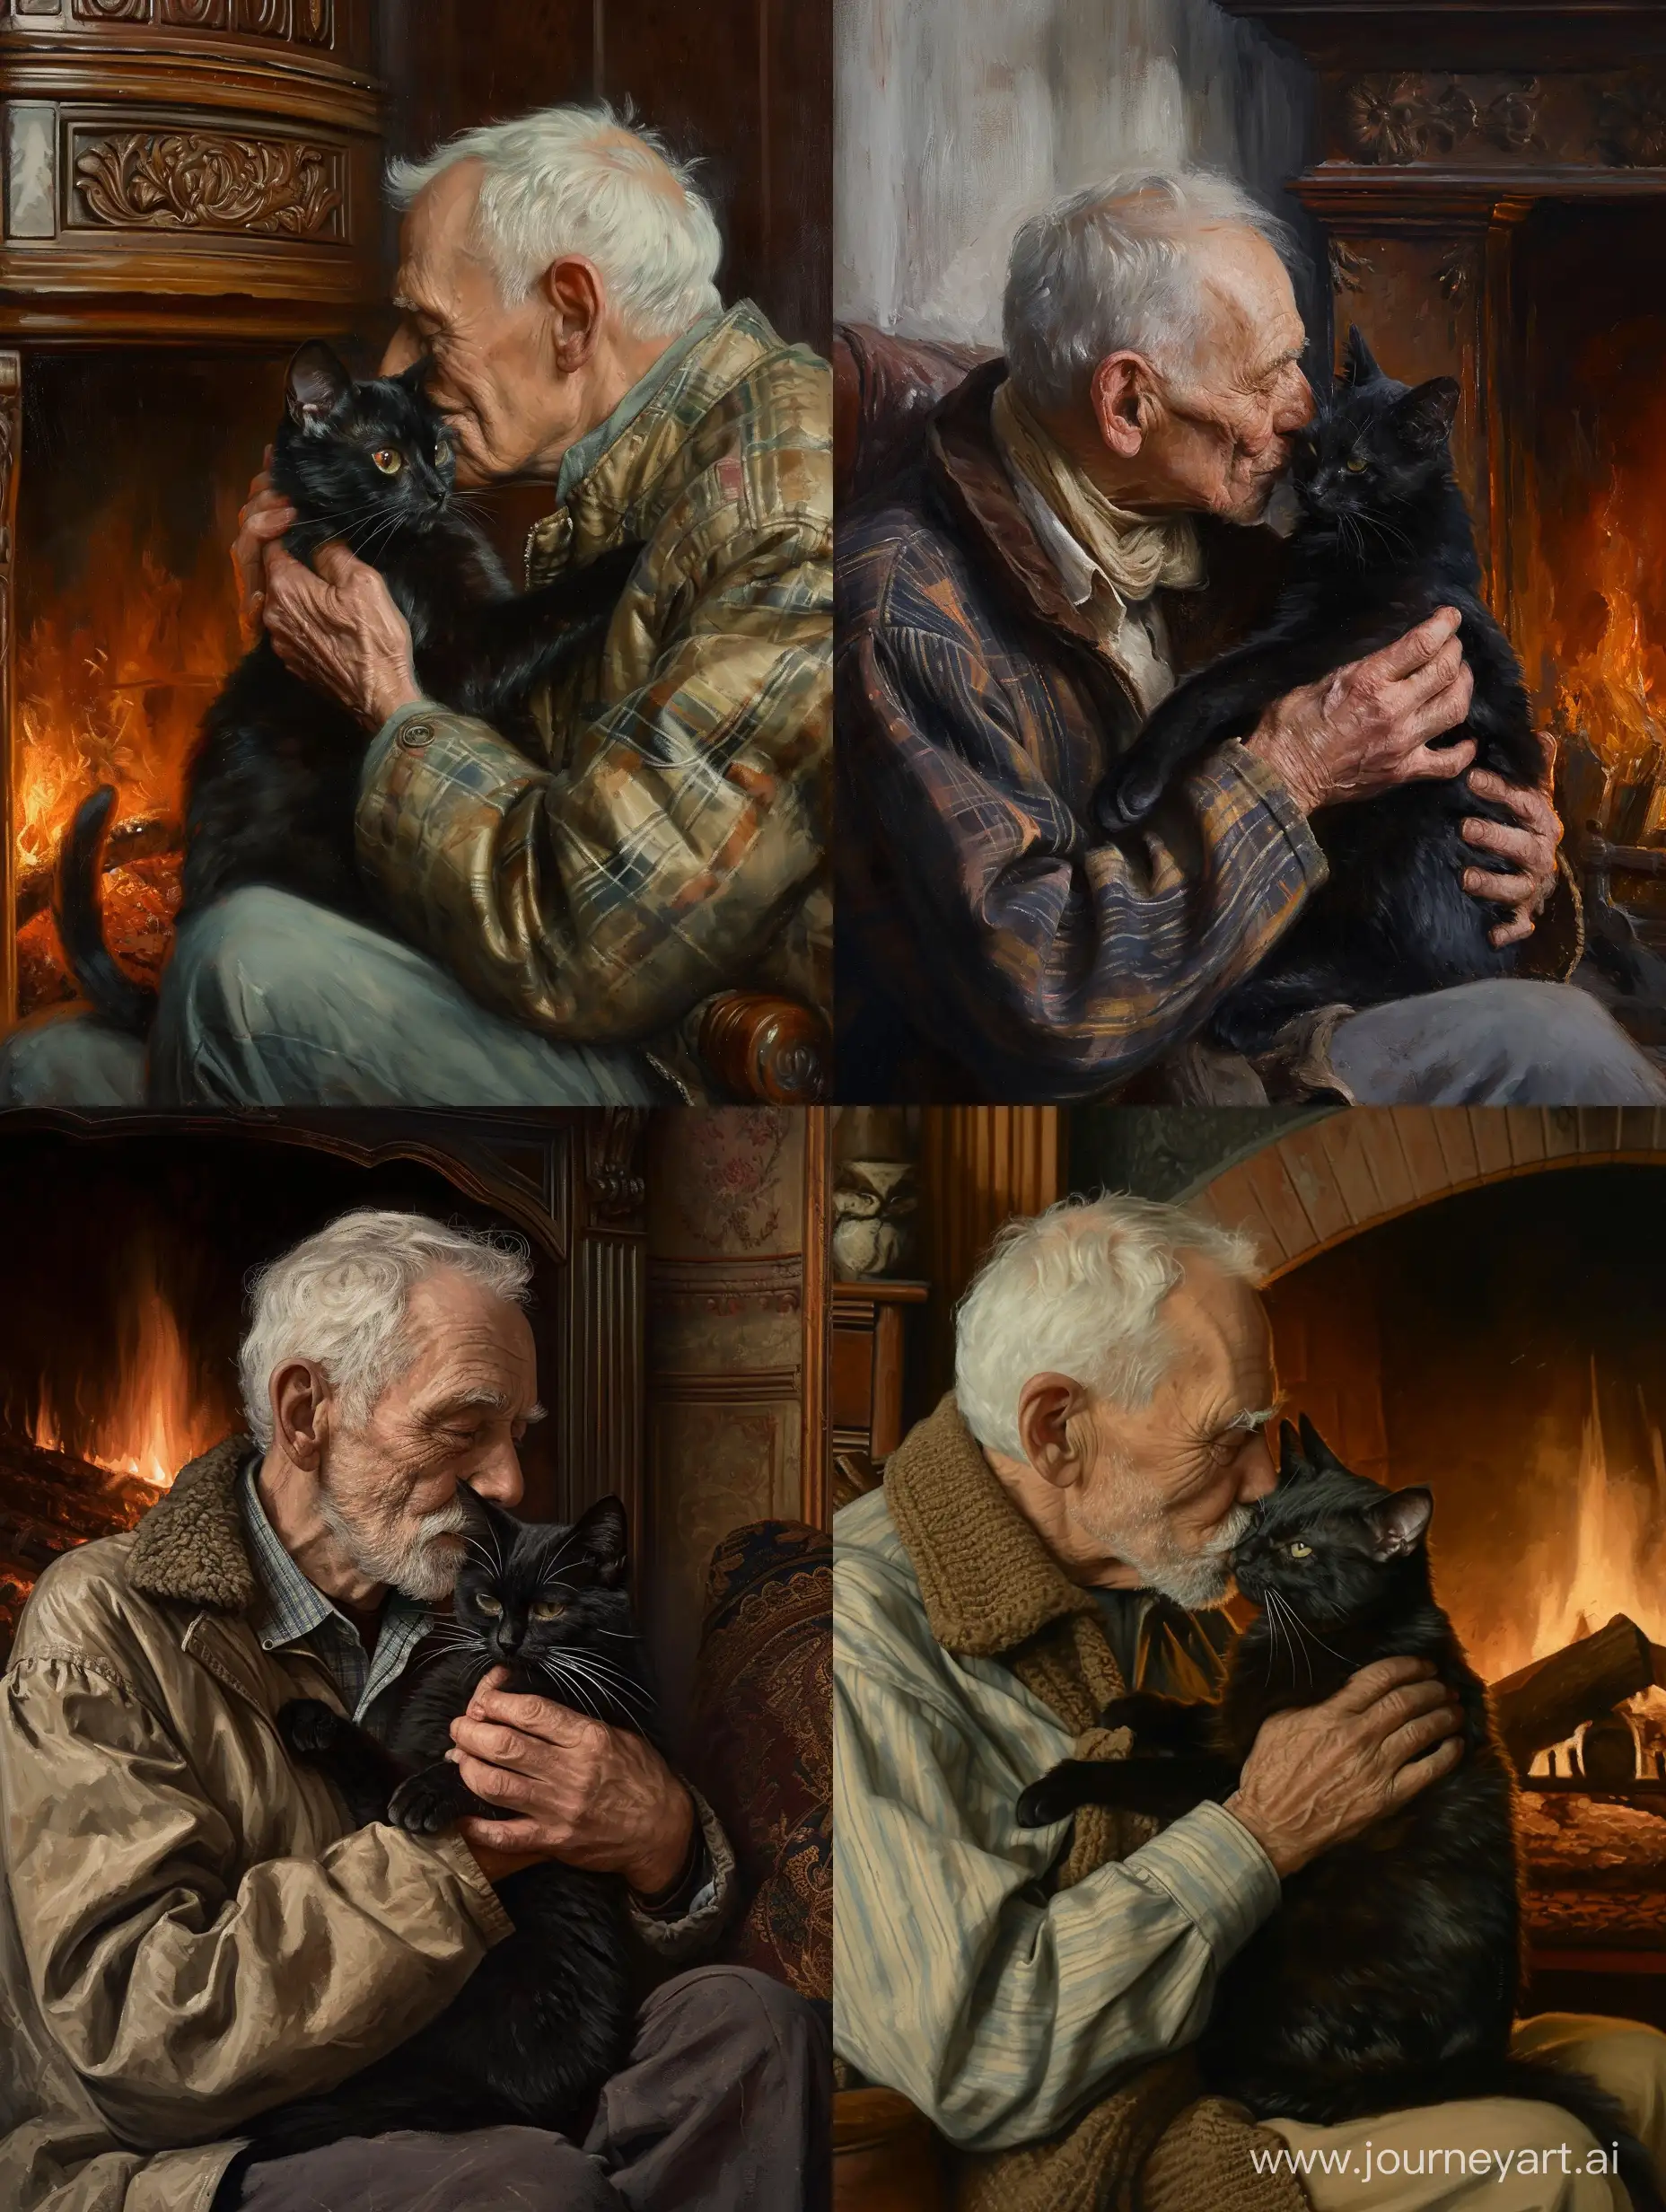 Affectionate-Elderly-Man-Kissing-Black-Cat-by-Fireplace